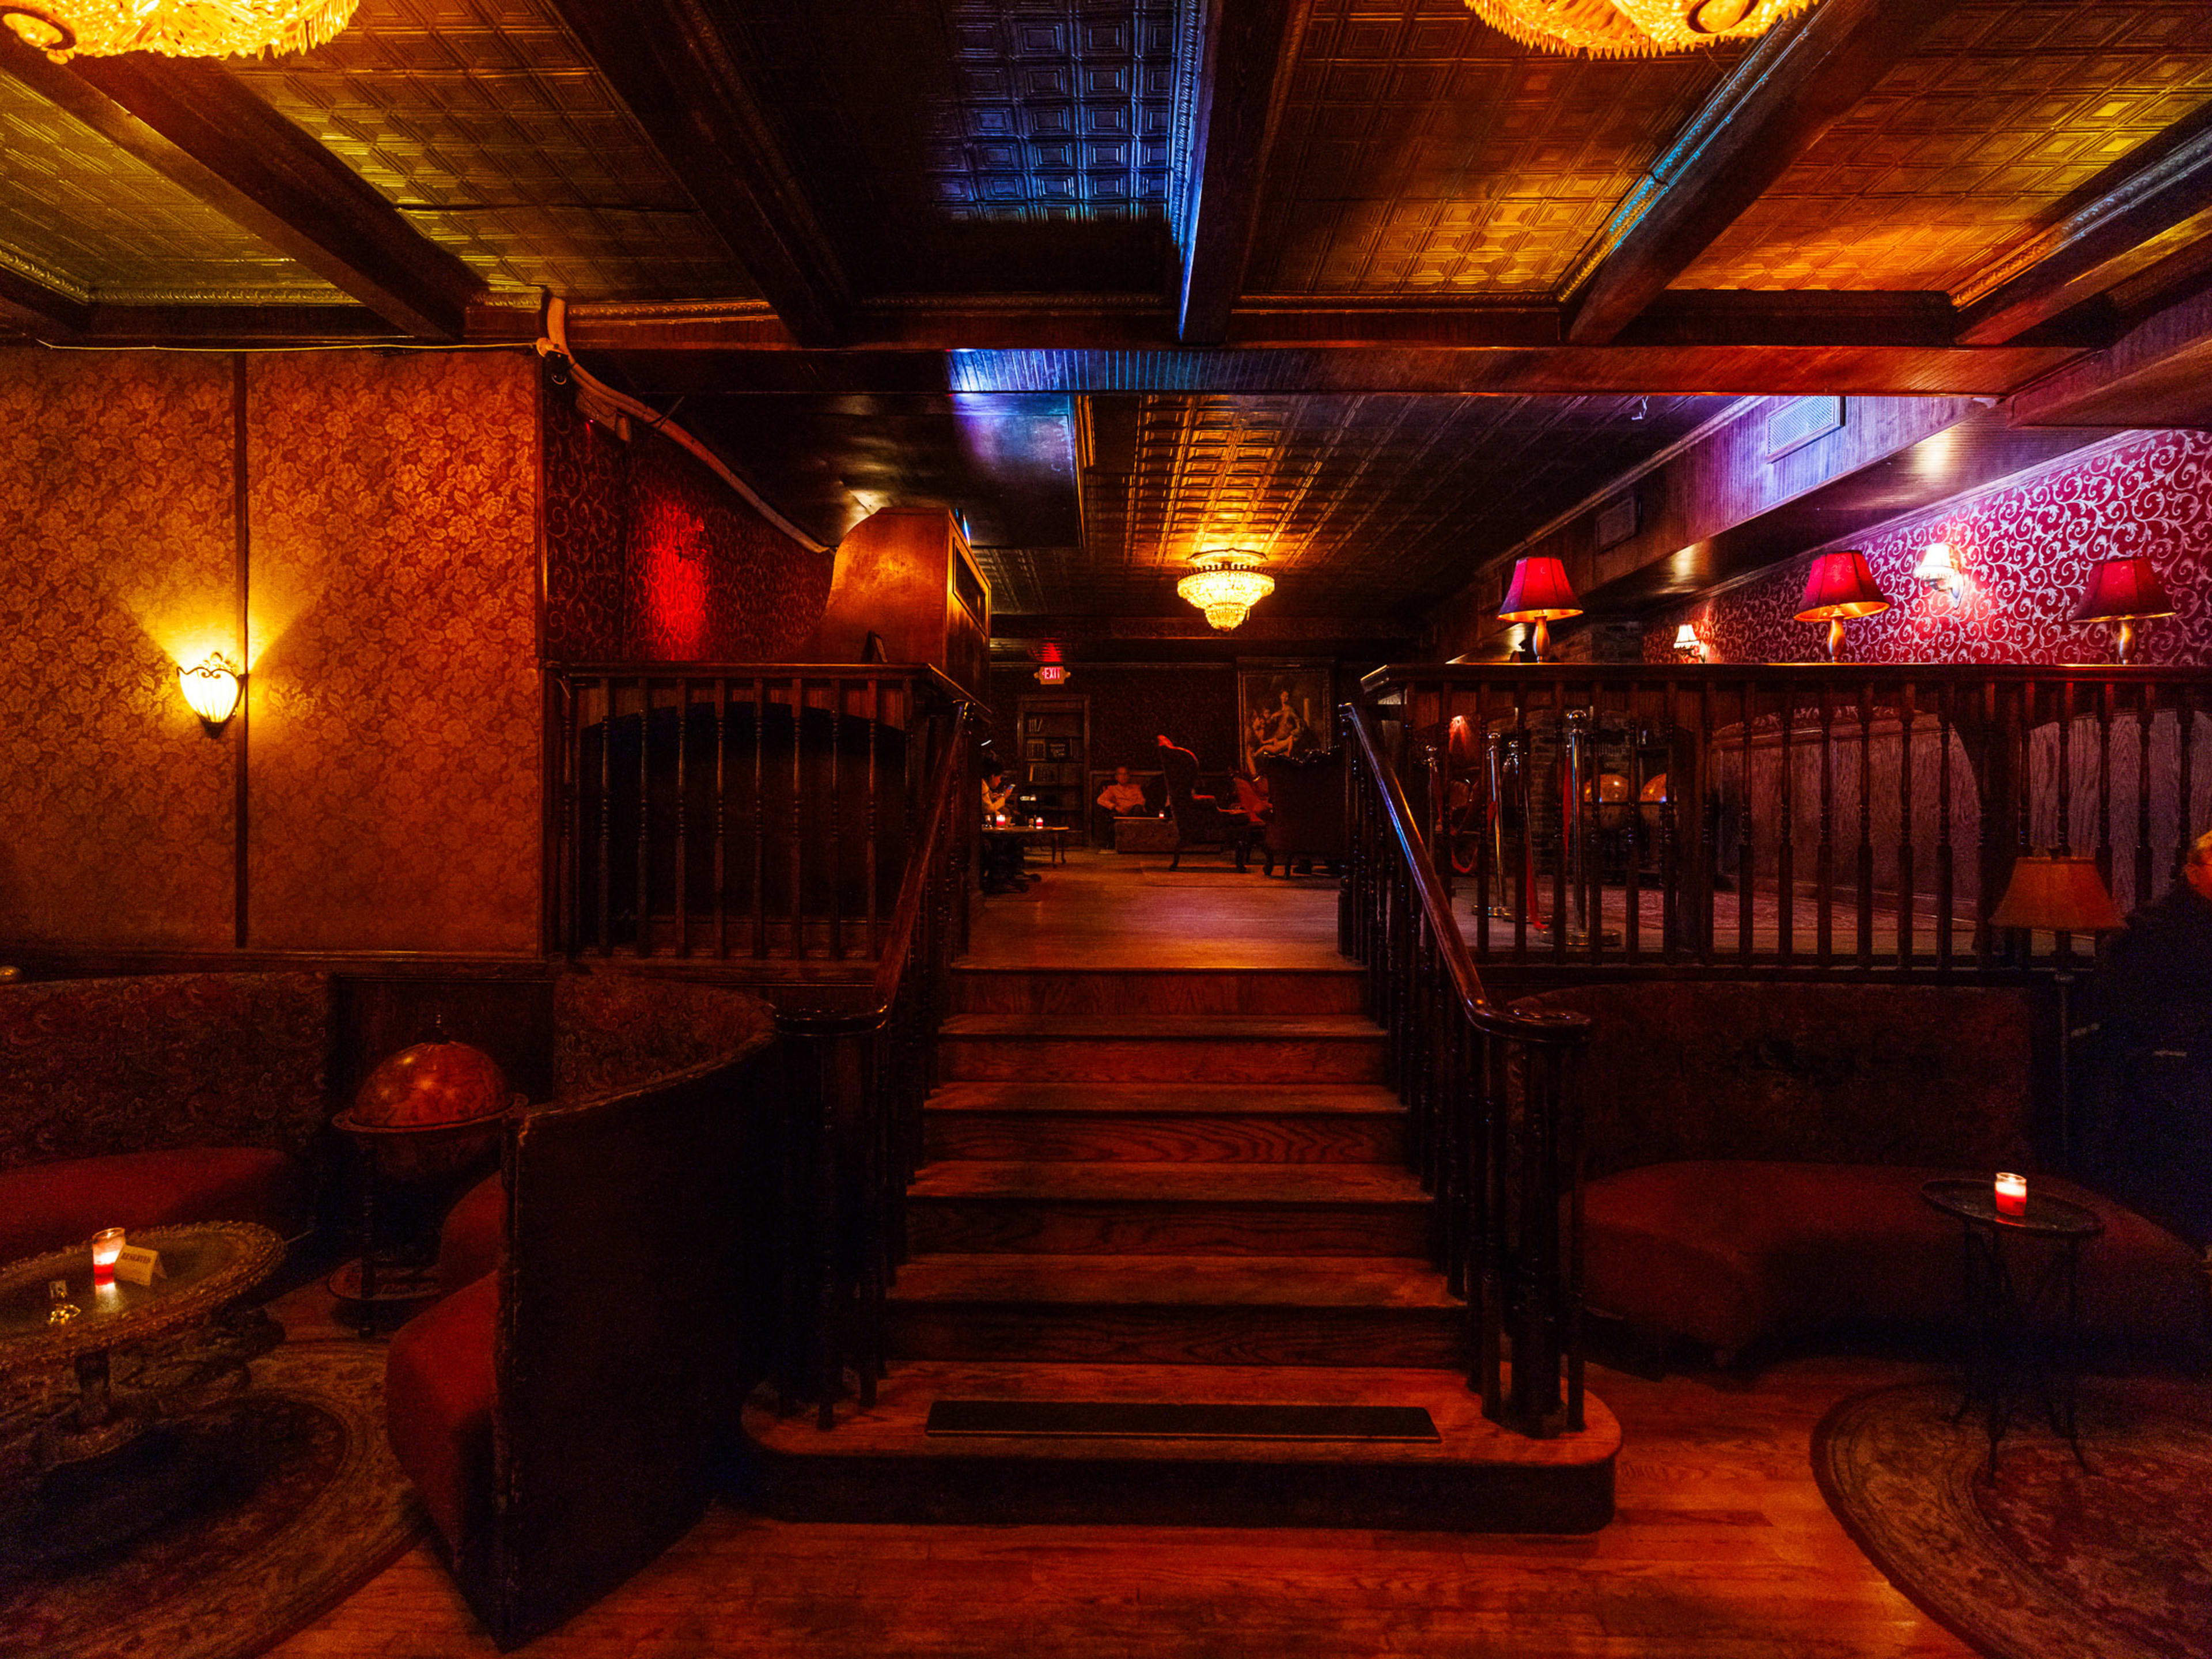 The Back Room speakeasy interiors with dim red lighting and a staircase leading up to a second level of the bar